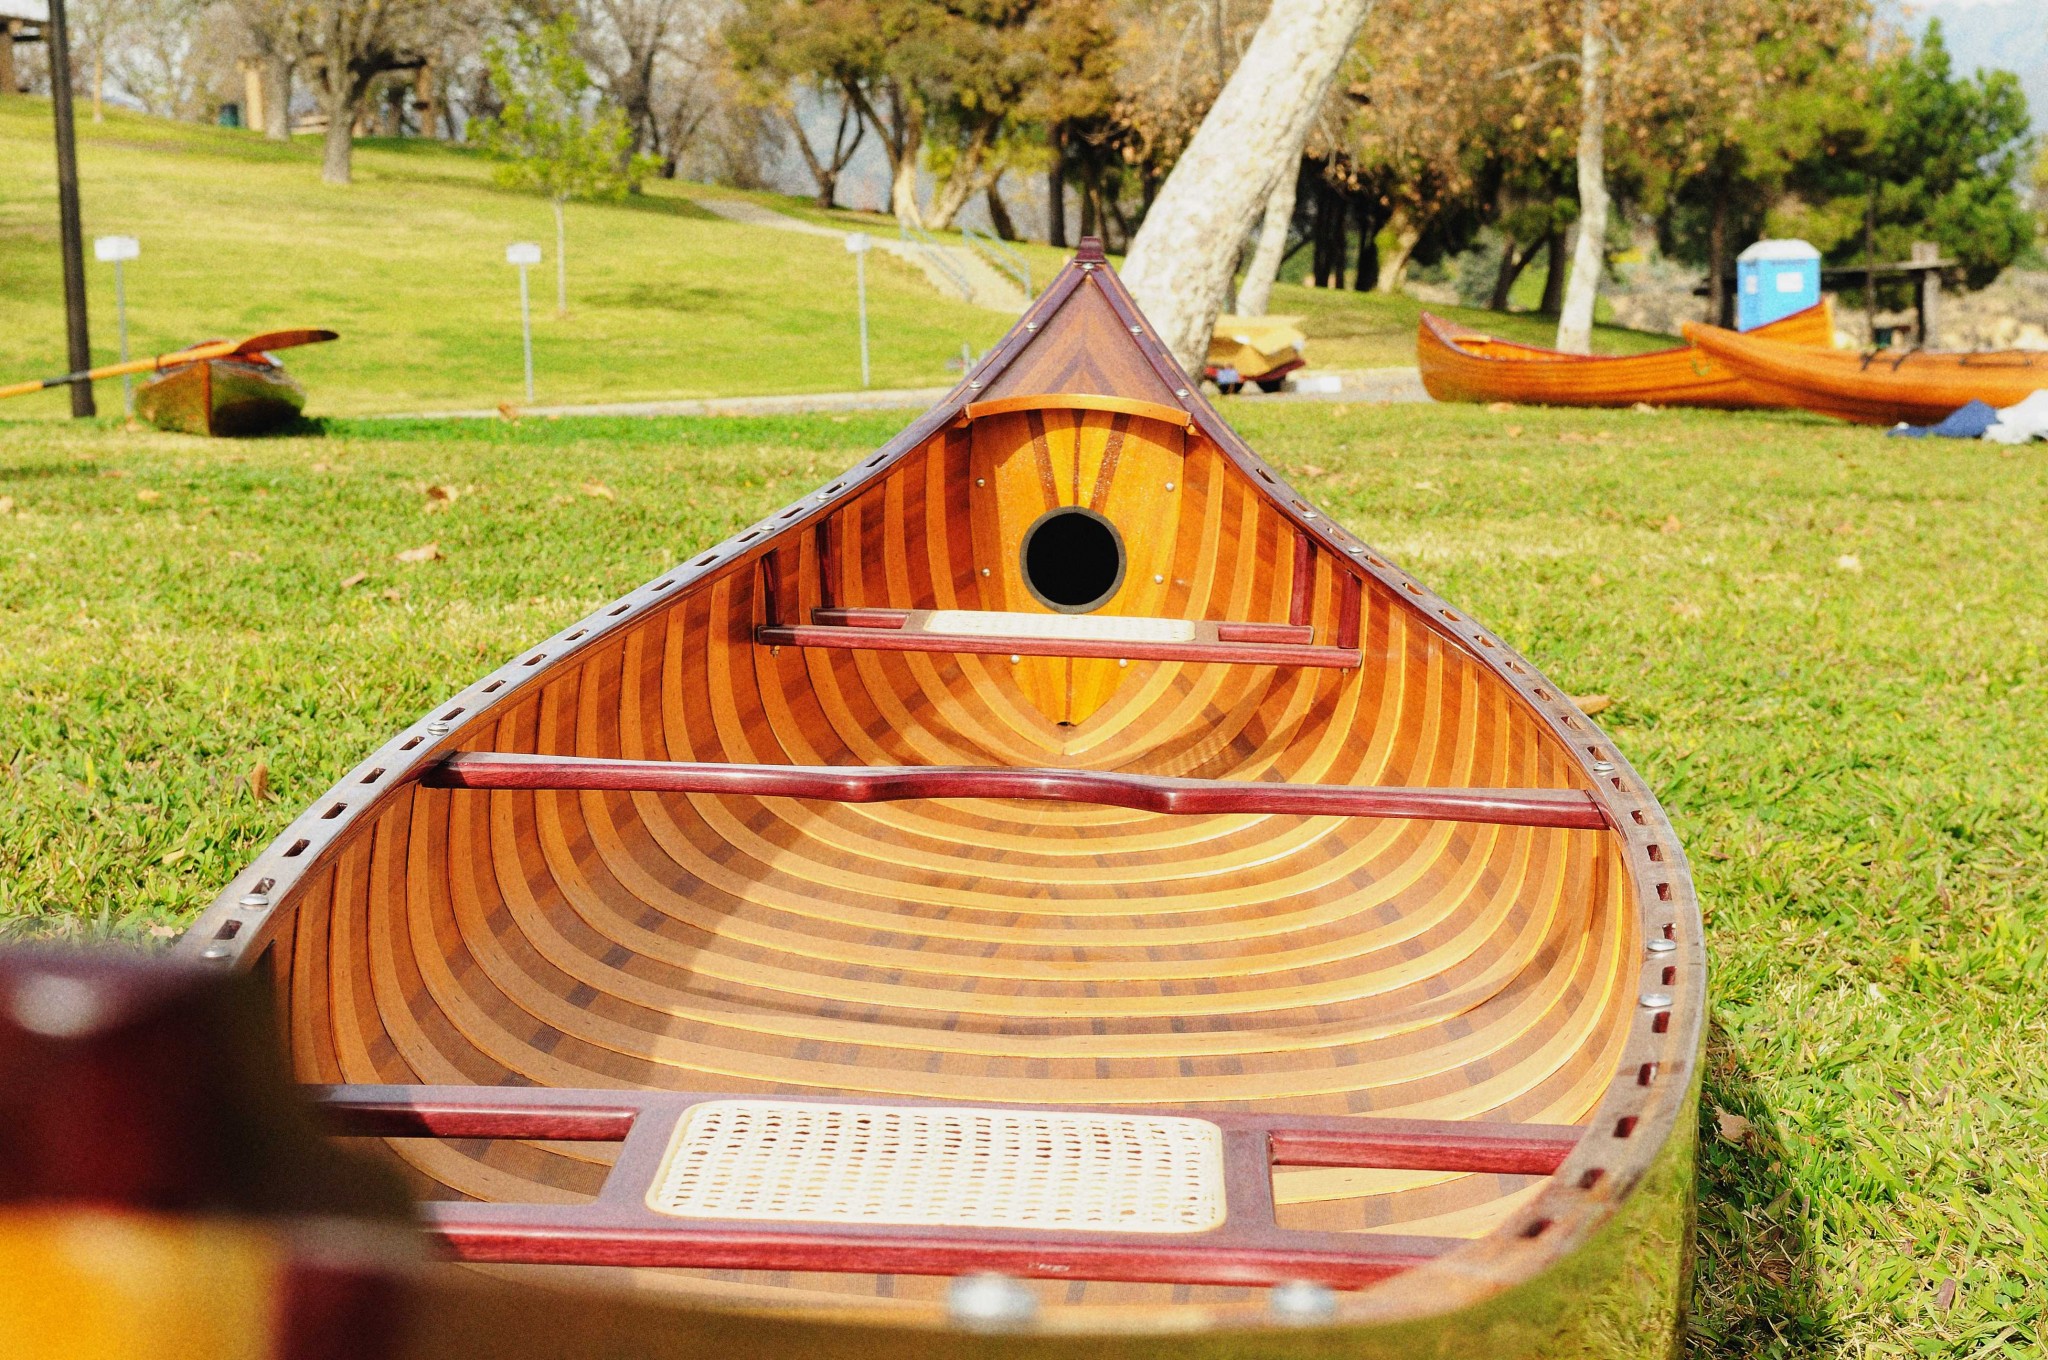 31.5" x 187.5" x 24" Wooden Canoe with Ribs